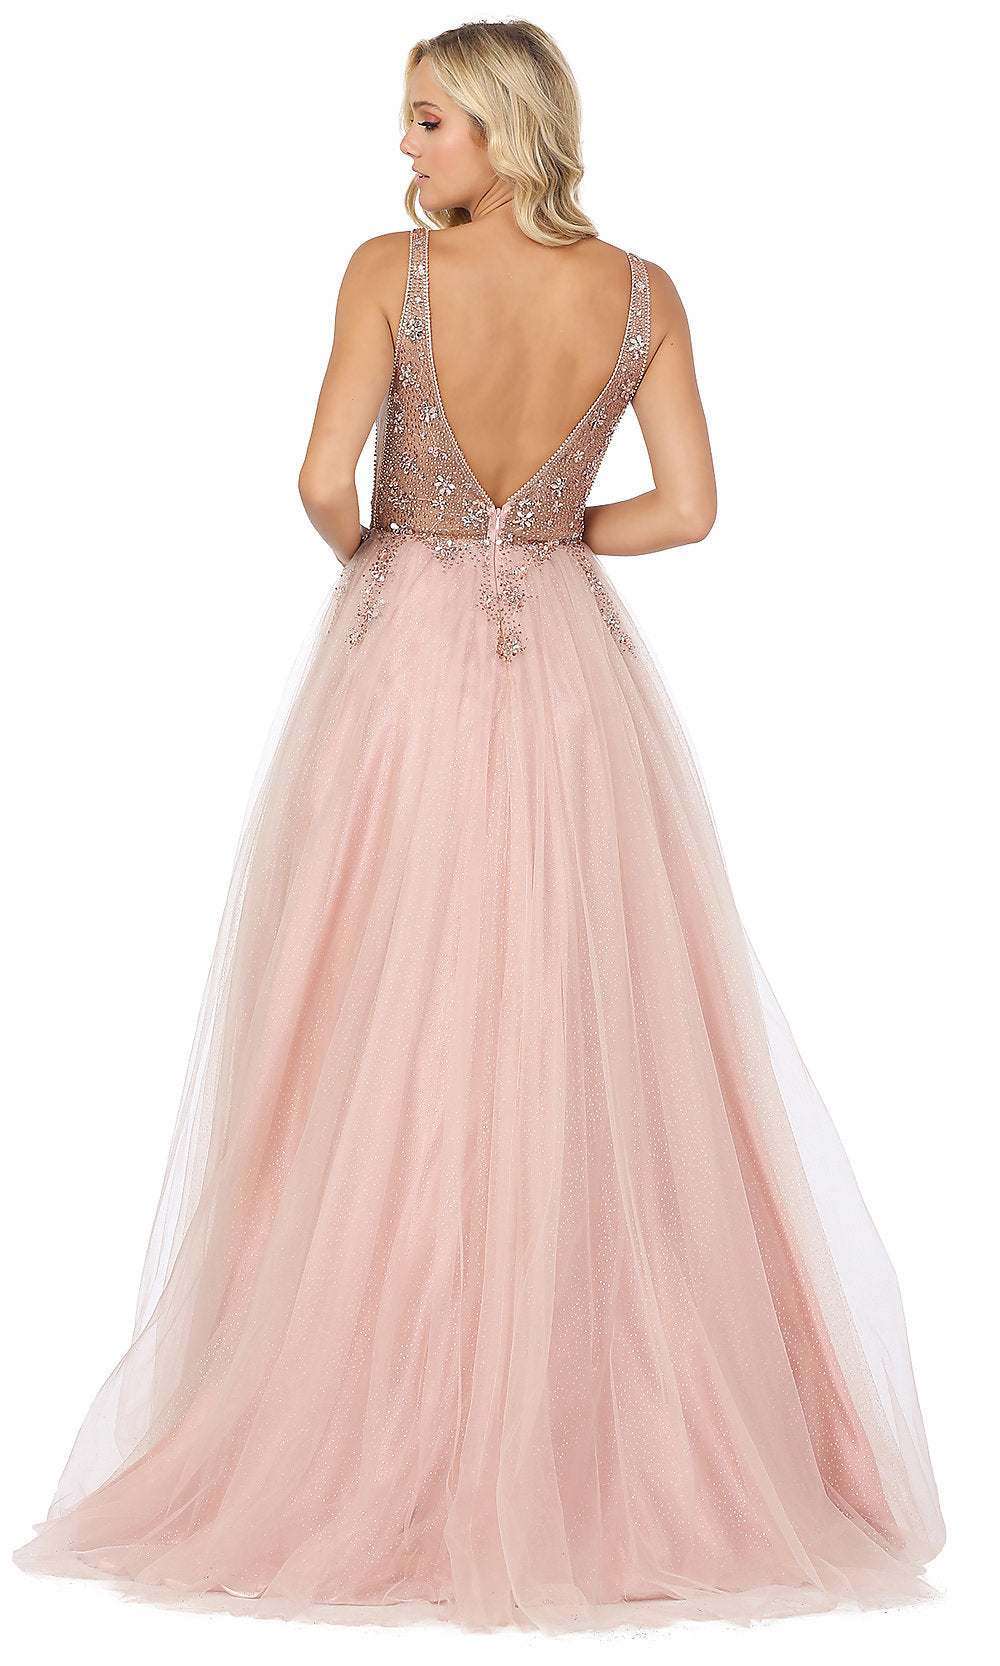  Ball-Gown-Style Beaded-Bodice Formal Prom Dress